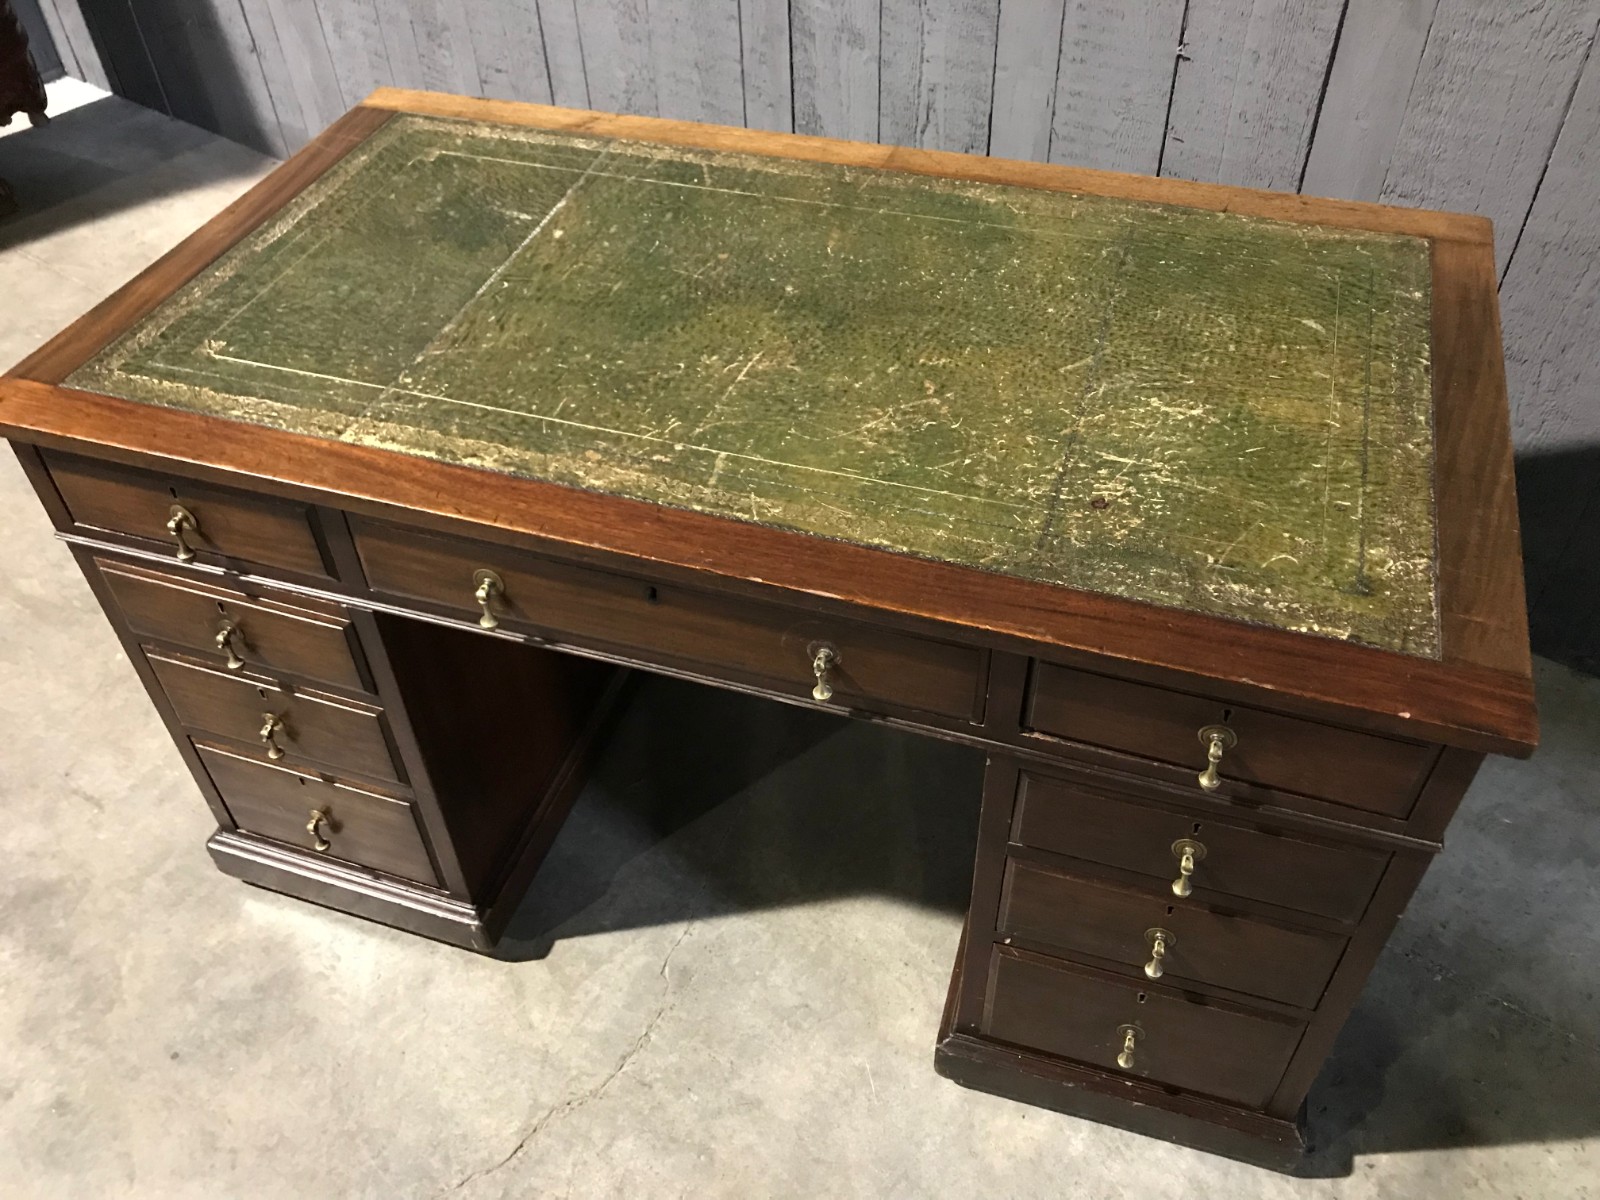 Mahogany English Desk With Drawers With Green Leather Top Desks